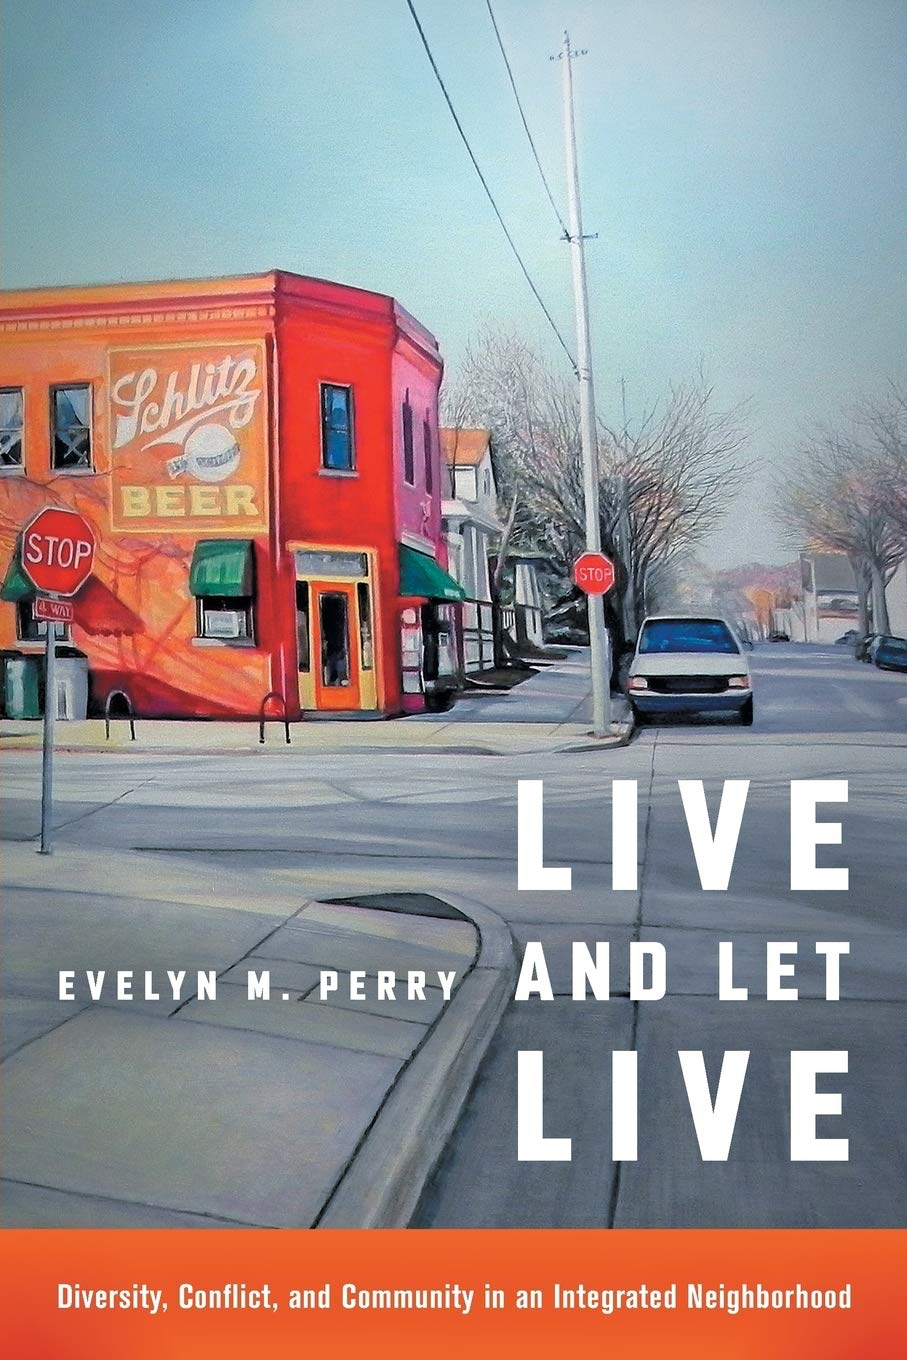 Live and Let Live: Diversity, Conflict, and Community in an Integrated Neighborhood